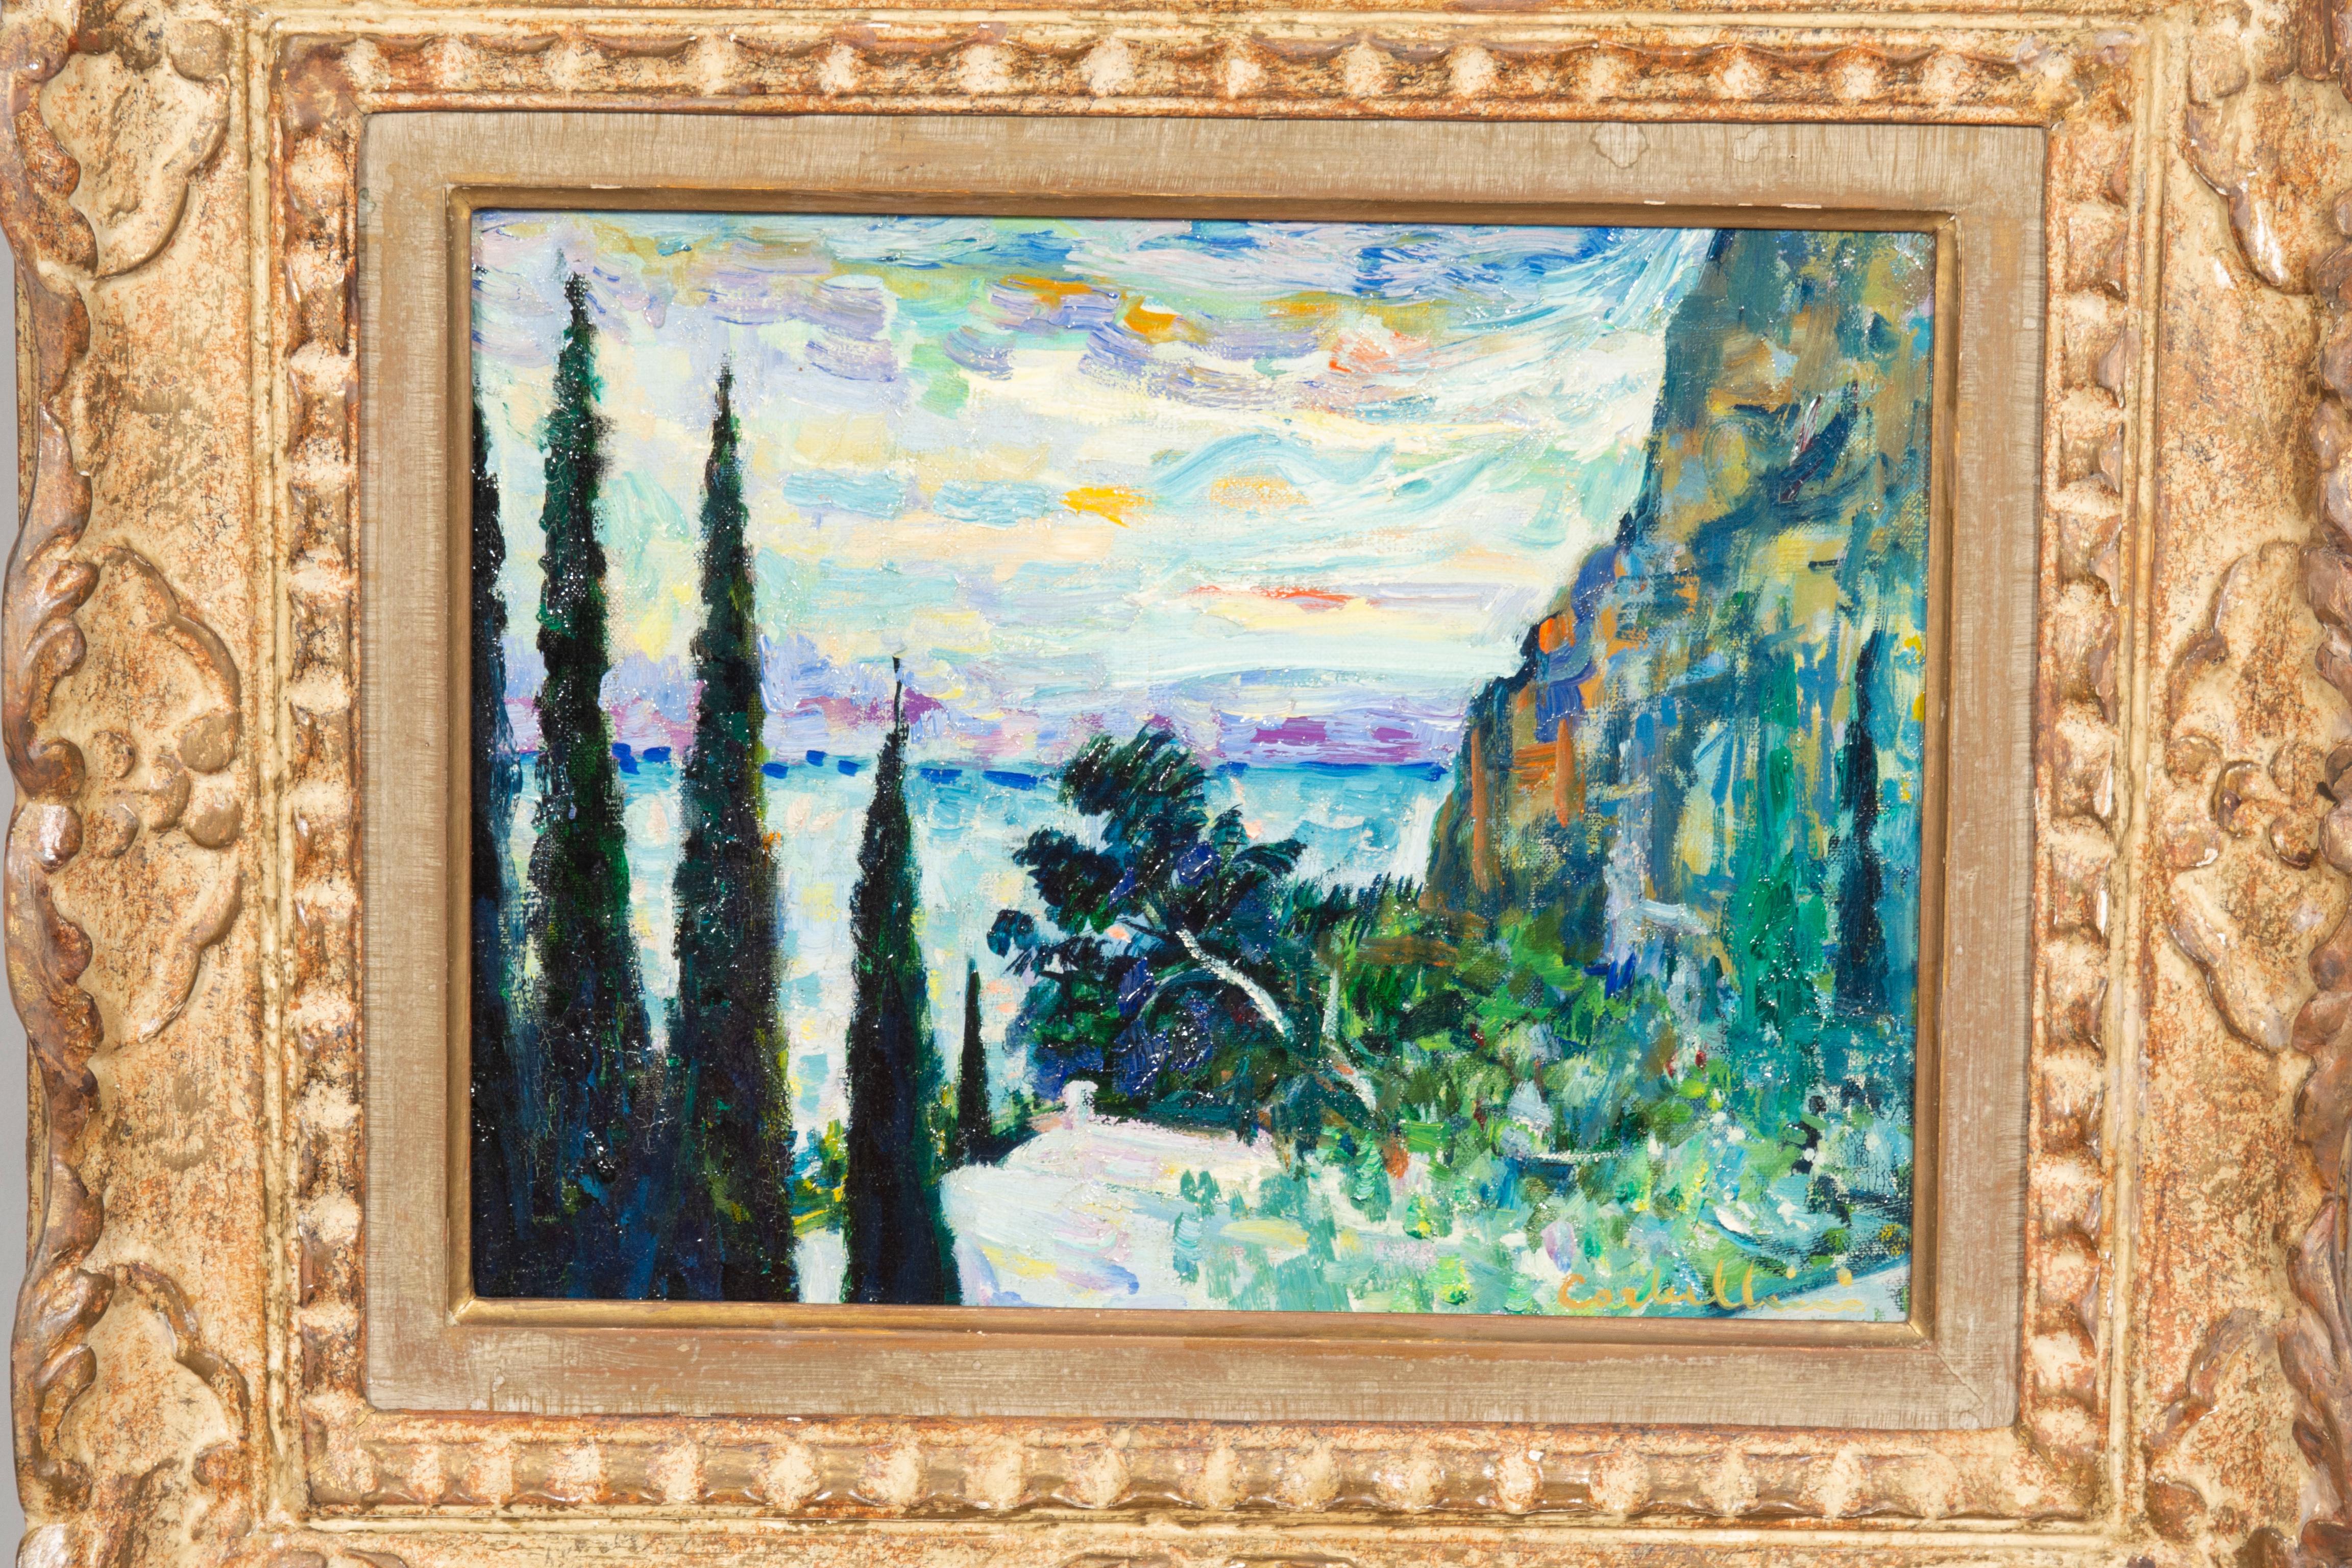 Born in Italy and lived mainly in France. He was an Italian post impressionist painter. He exhibited at the Societe des Artistes Inde'pendants and later at Salon des Tuileries and Salon d' Automne. He spent much of his career painting in France.